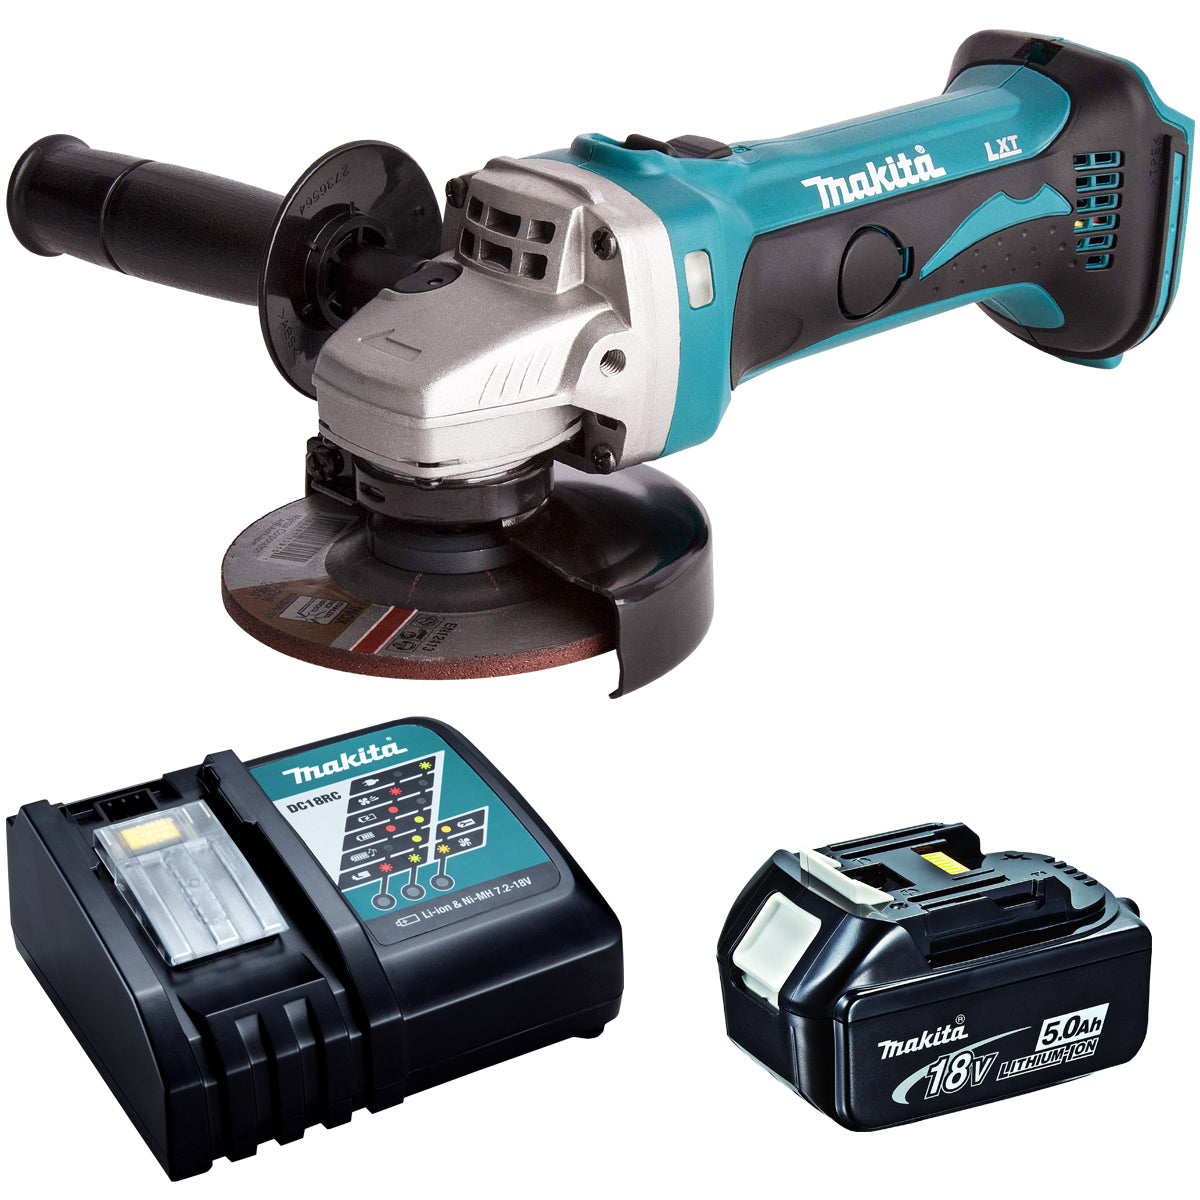 Makita DGA452Z 18V 115mm Angle Grinder with 1 x 5.0Ah Battery & Charger